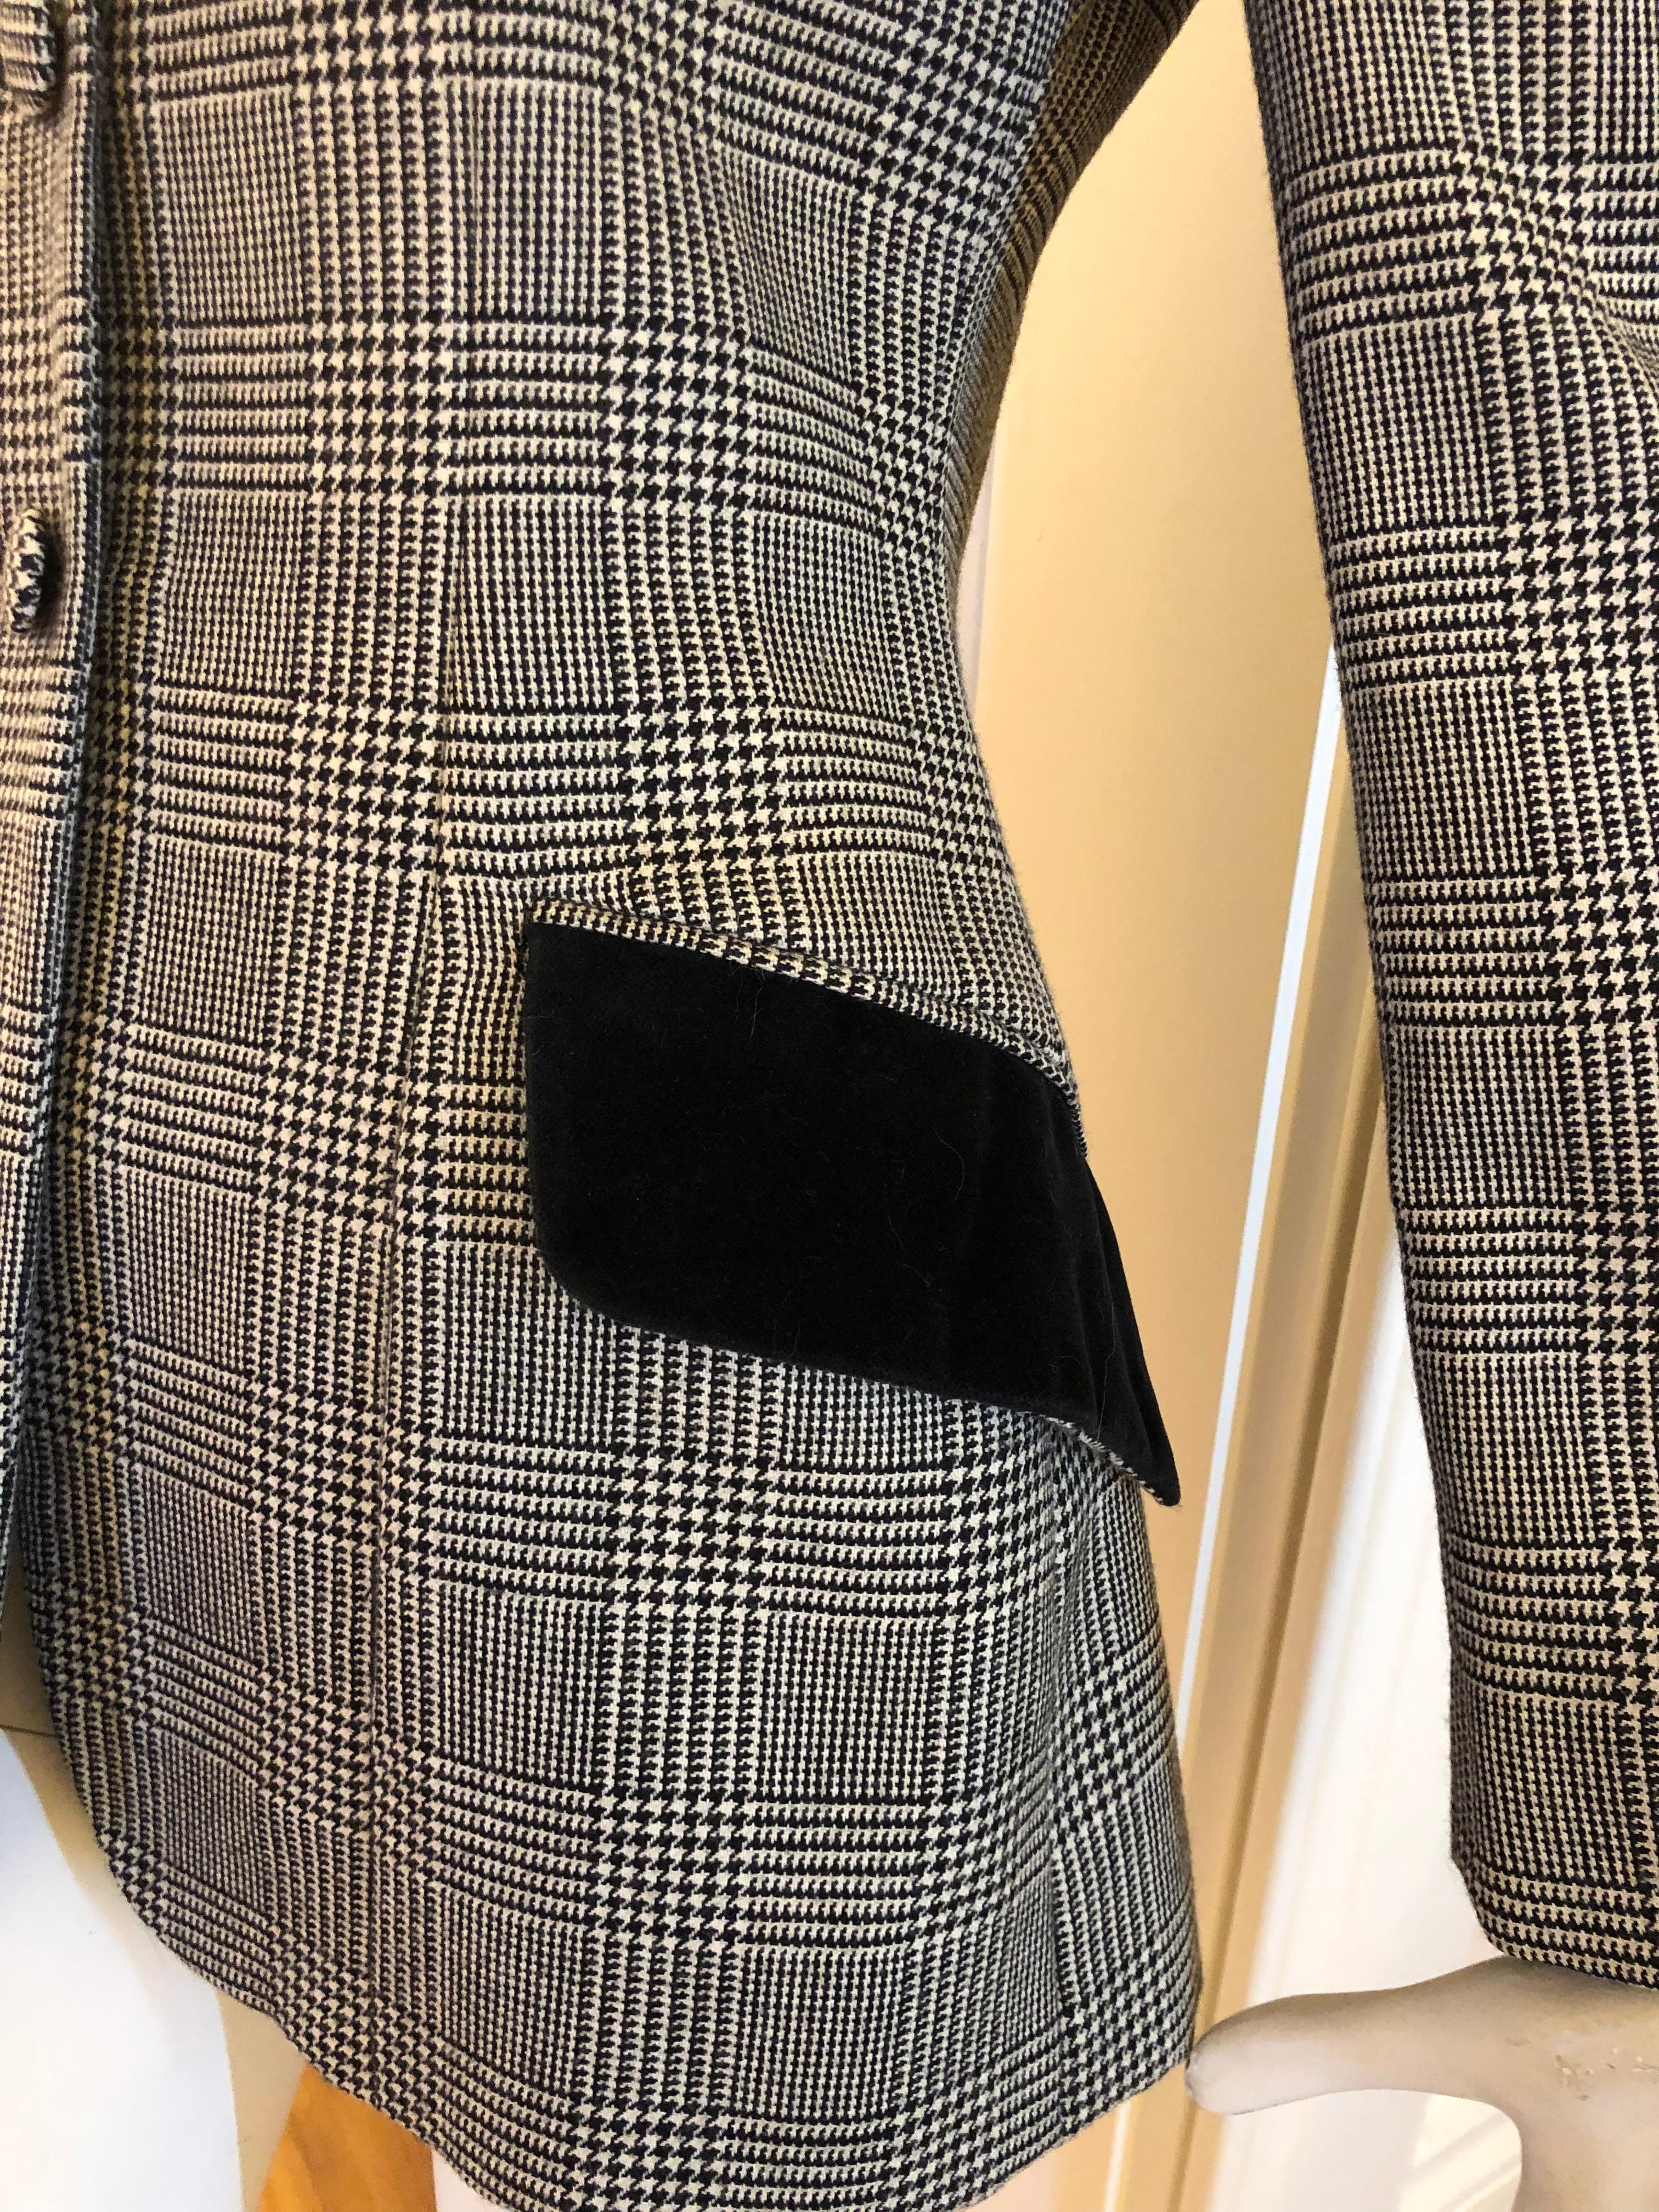 Elegant jacket in a black and white Glen Check pattern of 50% Alpaca and 50% Wool with velvet collar and pocket flaps. Fastening is by self check covered buttons and the spare button is still attached to the signed lining.